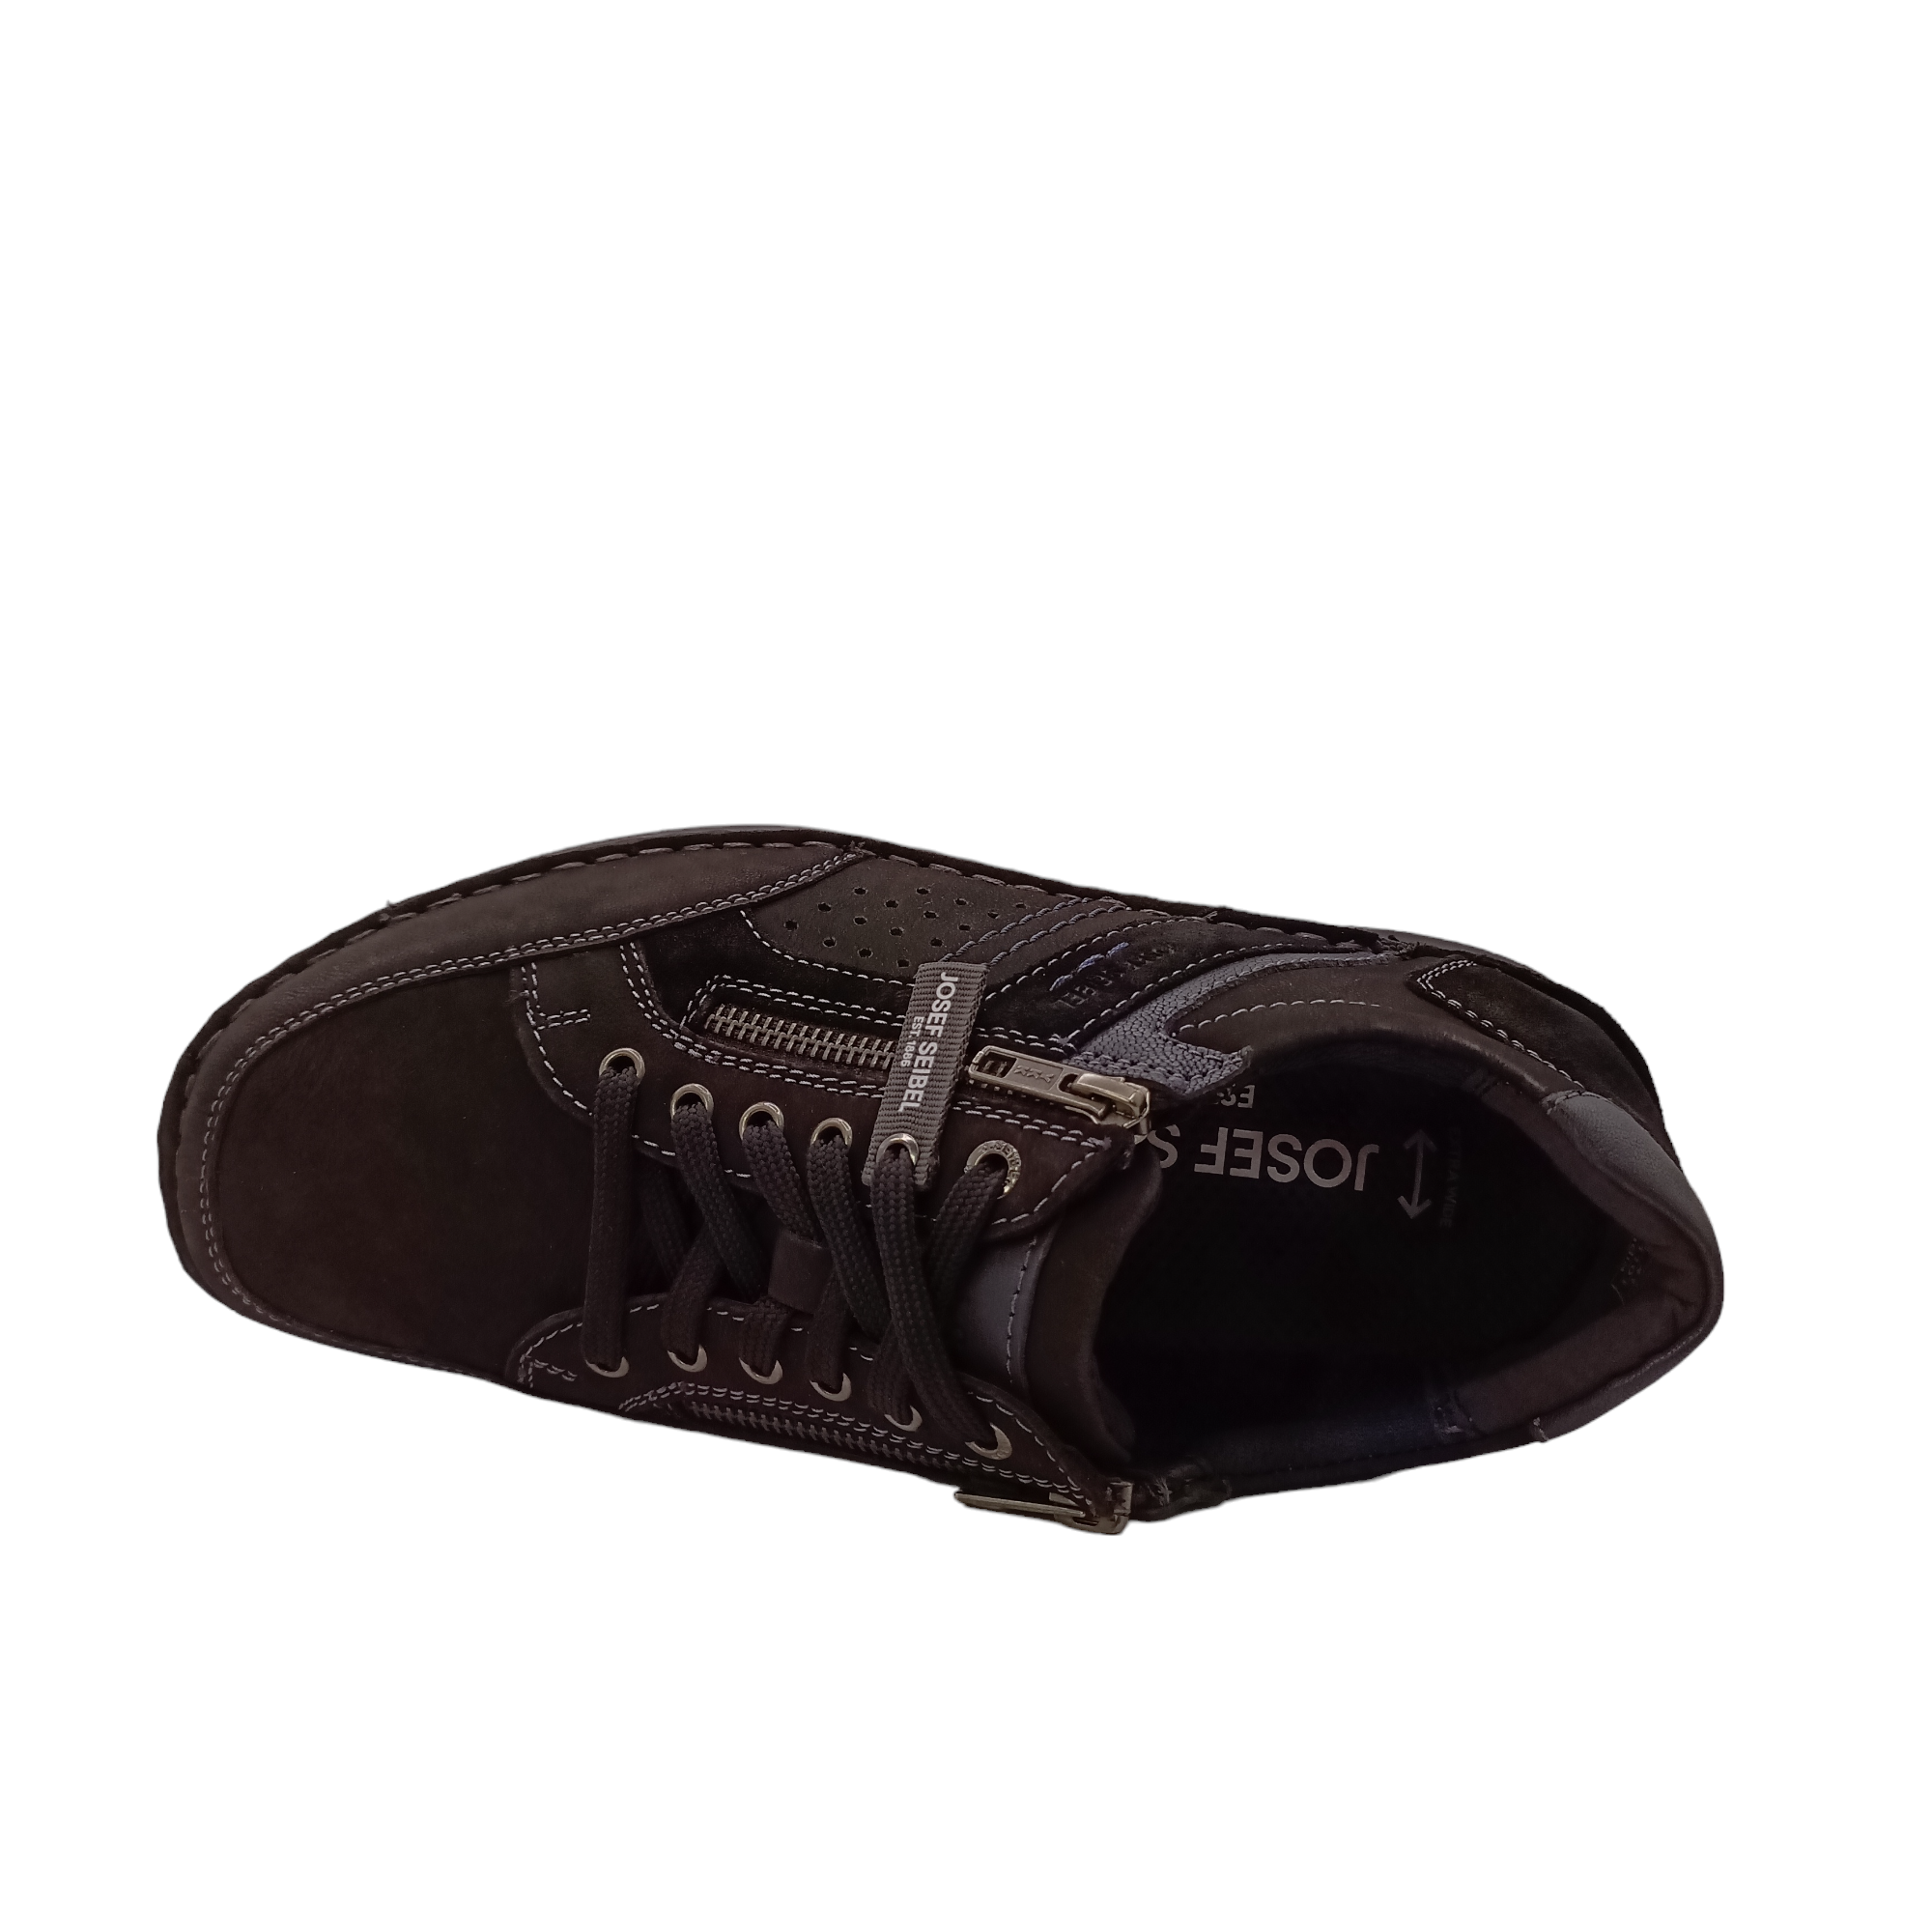 Shop Anvers 87 Josef Seibel - with shoe&amp;me - from Josef Seibel - Shoes - Mens, Shoe, Winter - [collection]